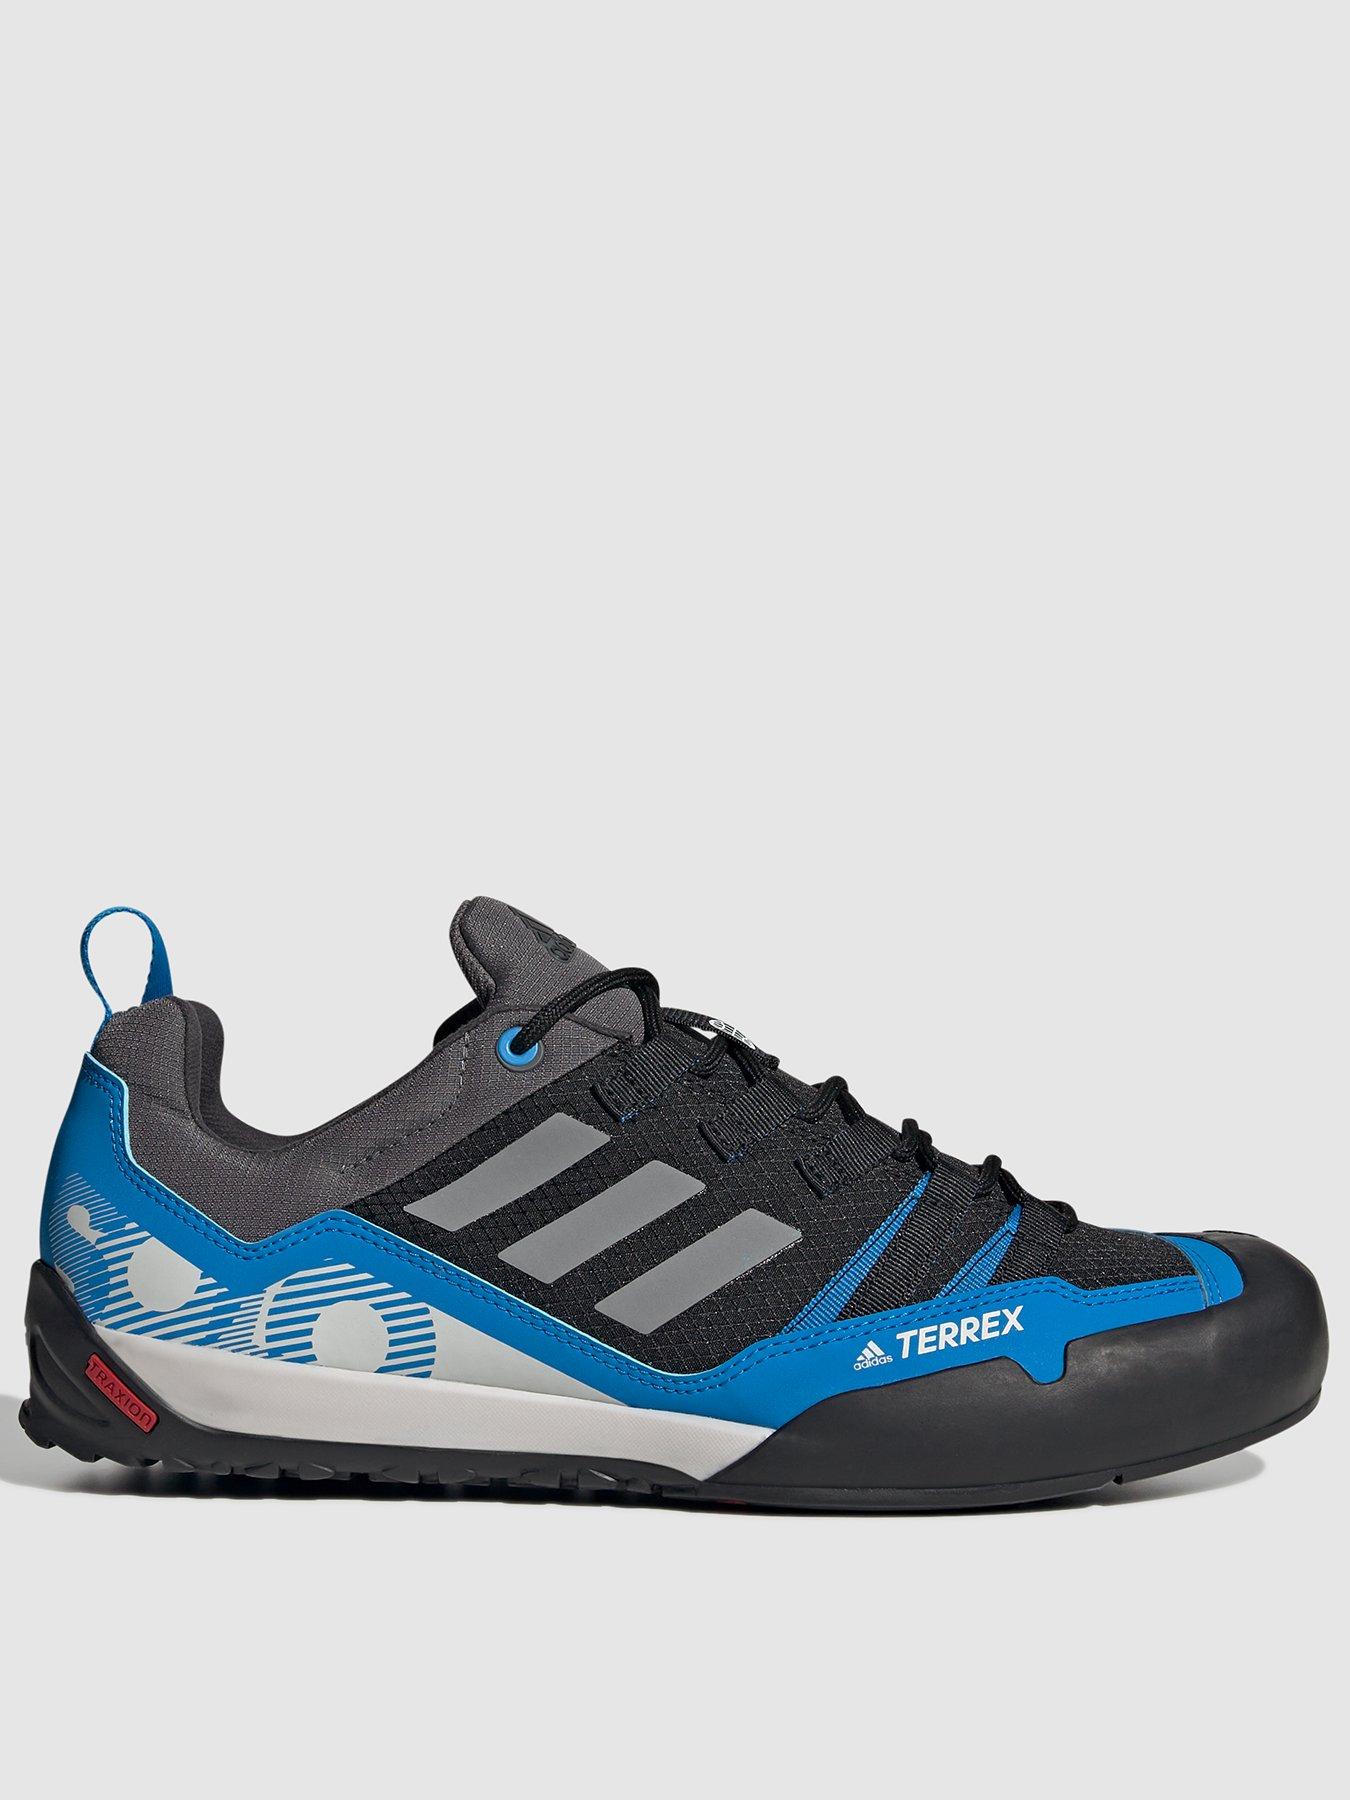 Fast Delivery to your doorstep adidas Unisex's Terrex Swift Solo 2 ...